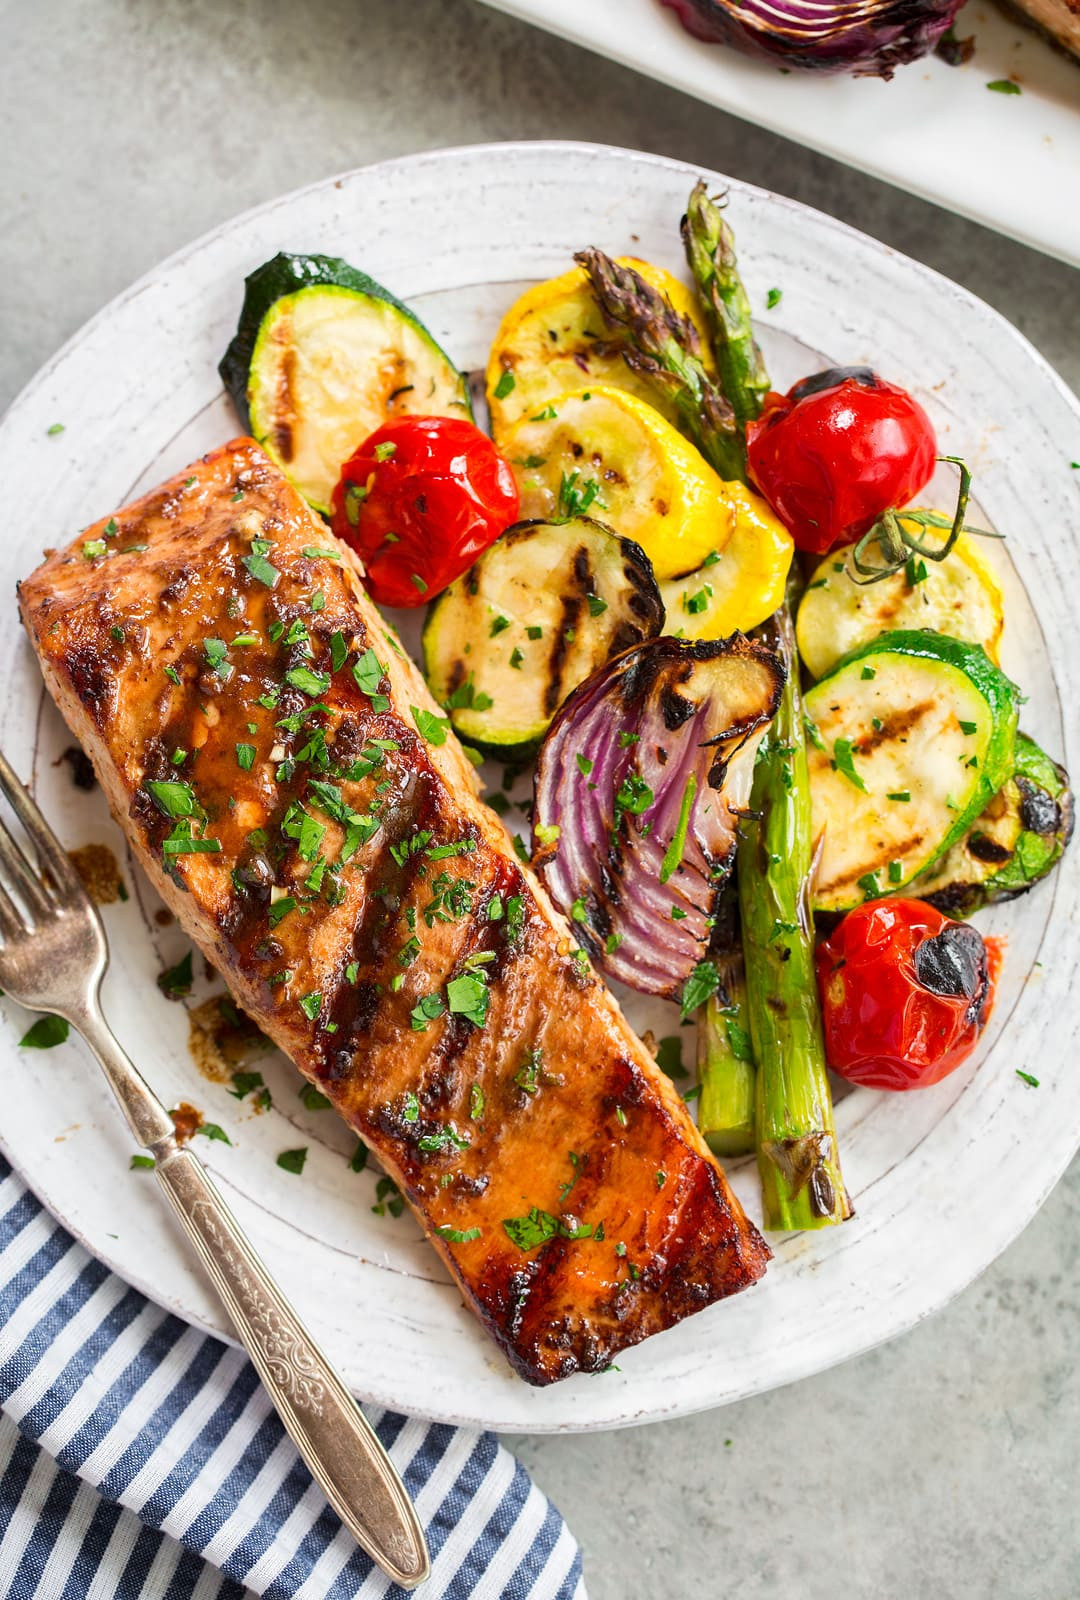 Grilled Salmon Side Dishes Luxury What Ve Able Goes Well with Grilled Salmon Best